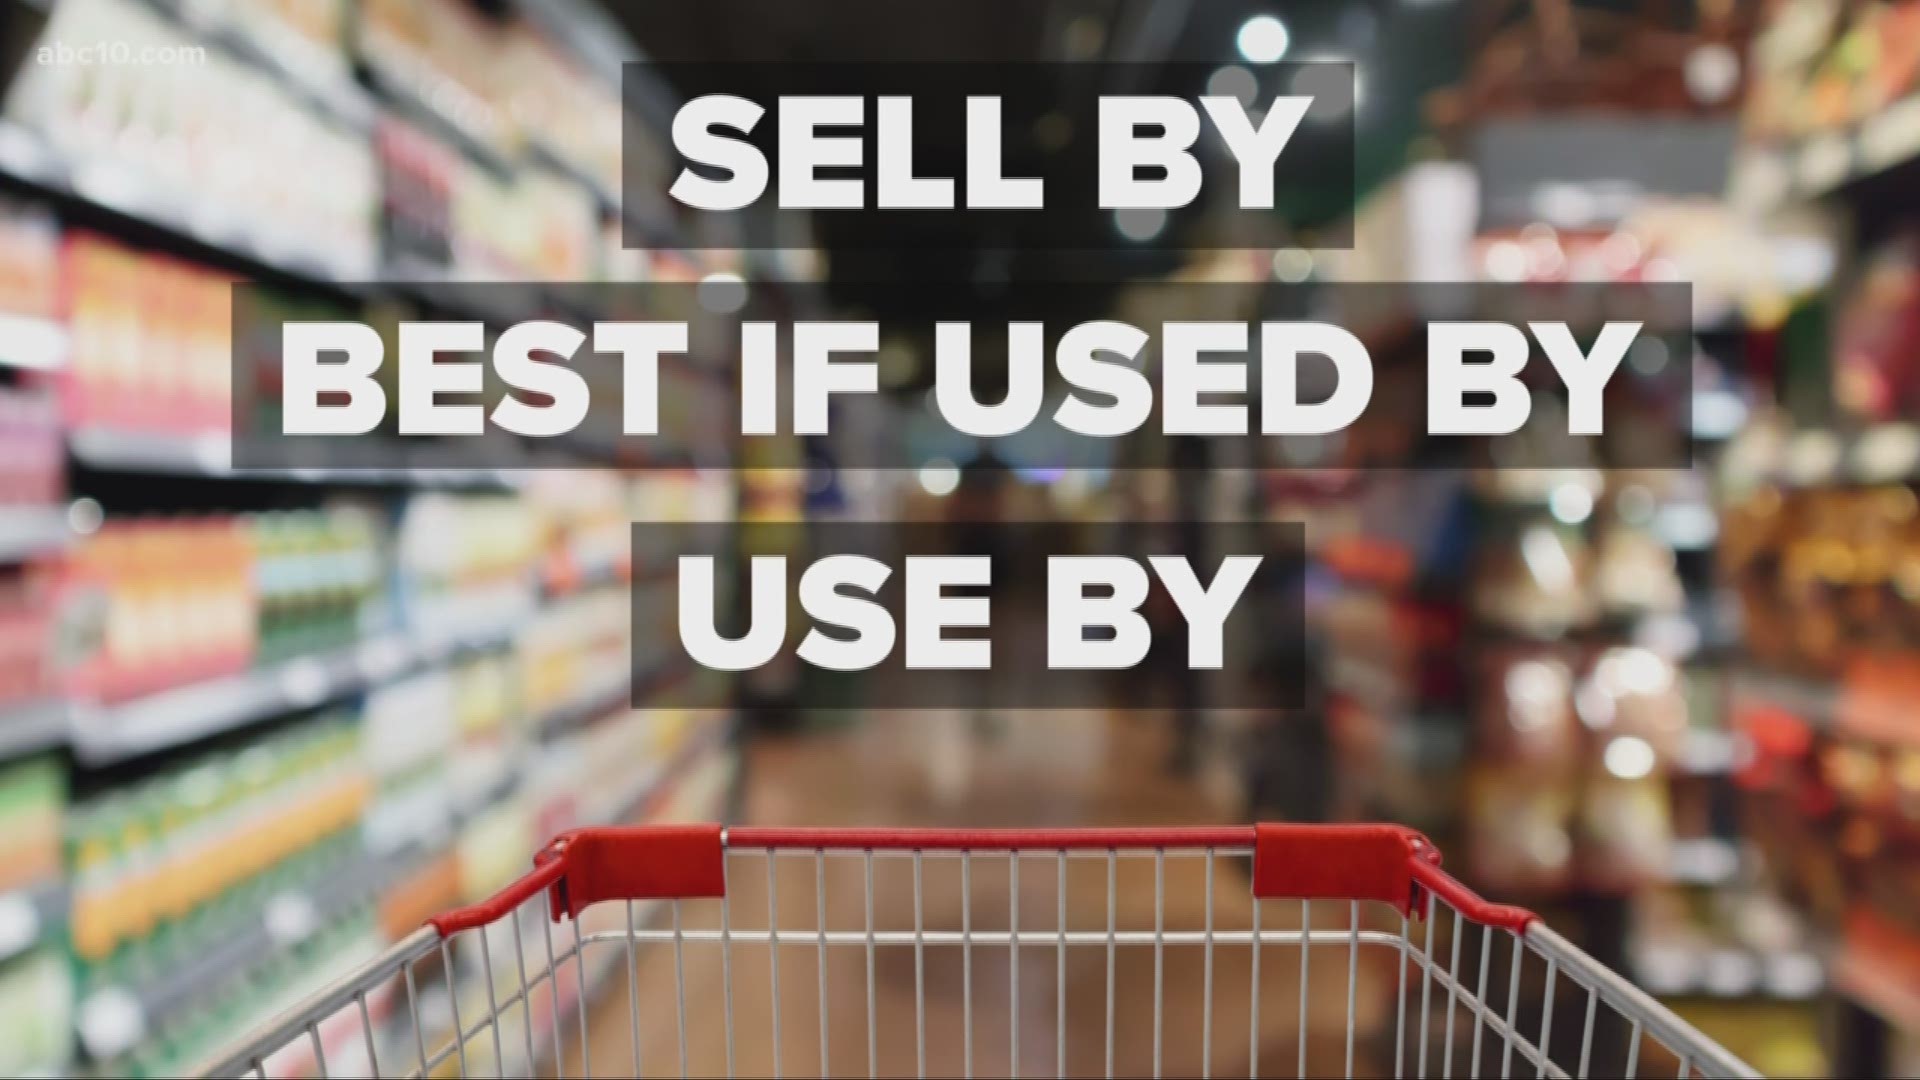 "Best if used by", "sell by", "use by", we've all seen it on food packaging, but Brittany explains what it all means in today's Begley's Bargains.